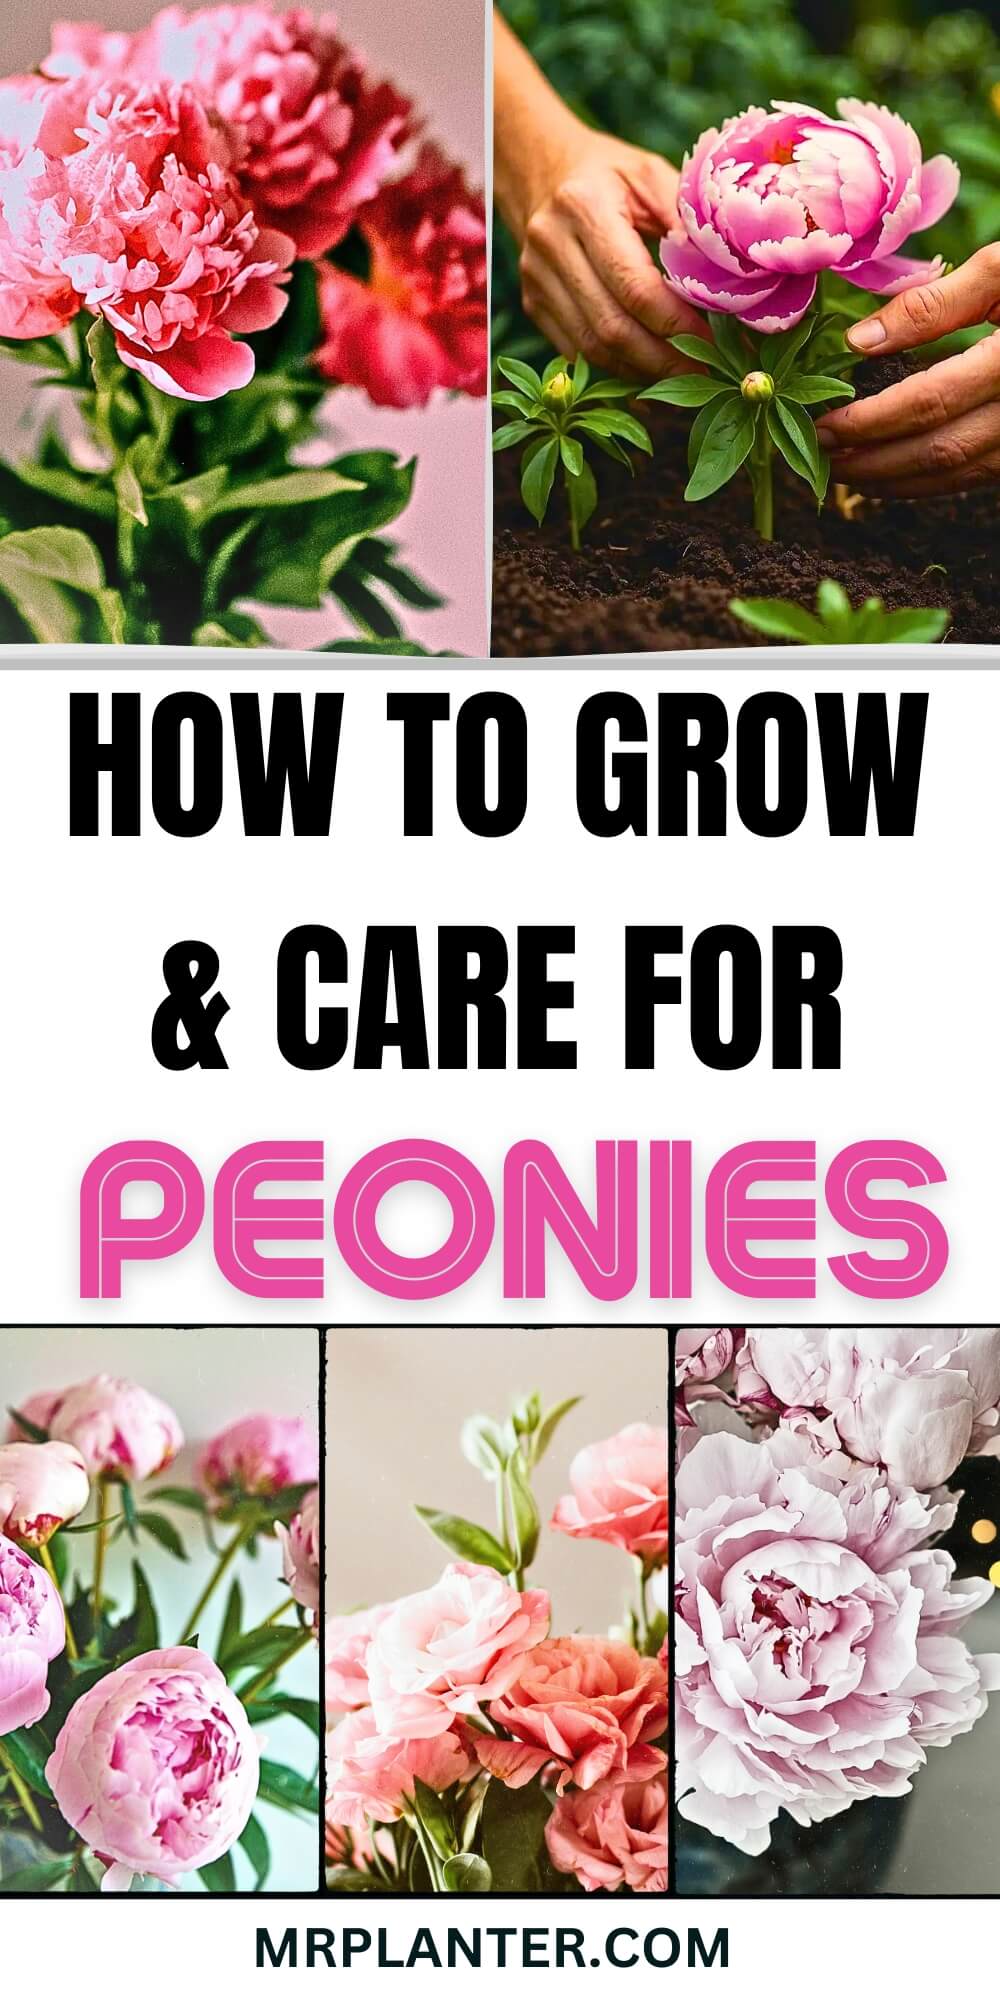 How to Grow & Care For Peonies?